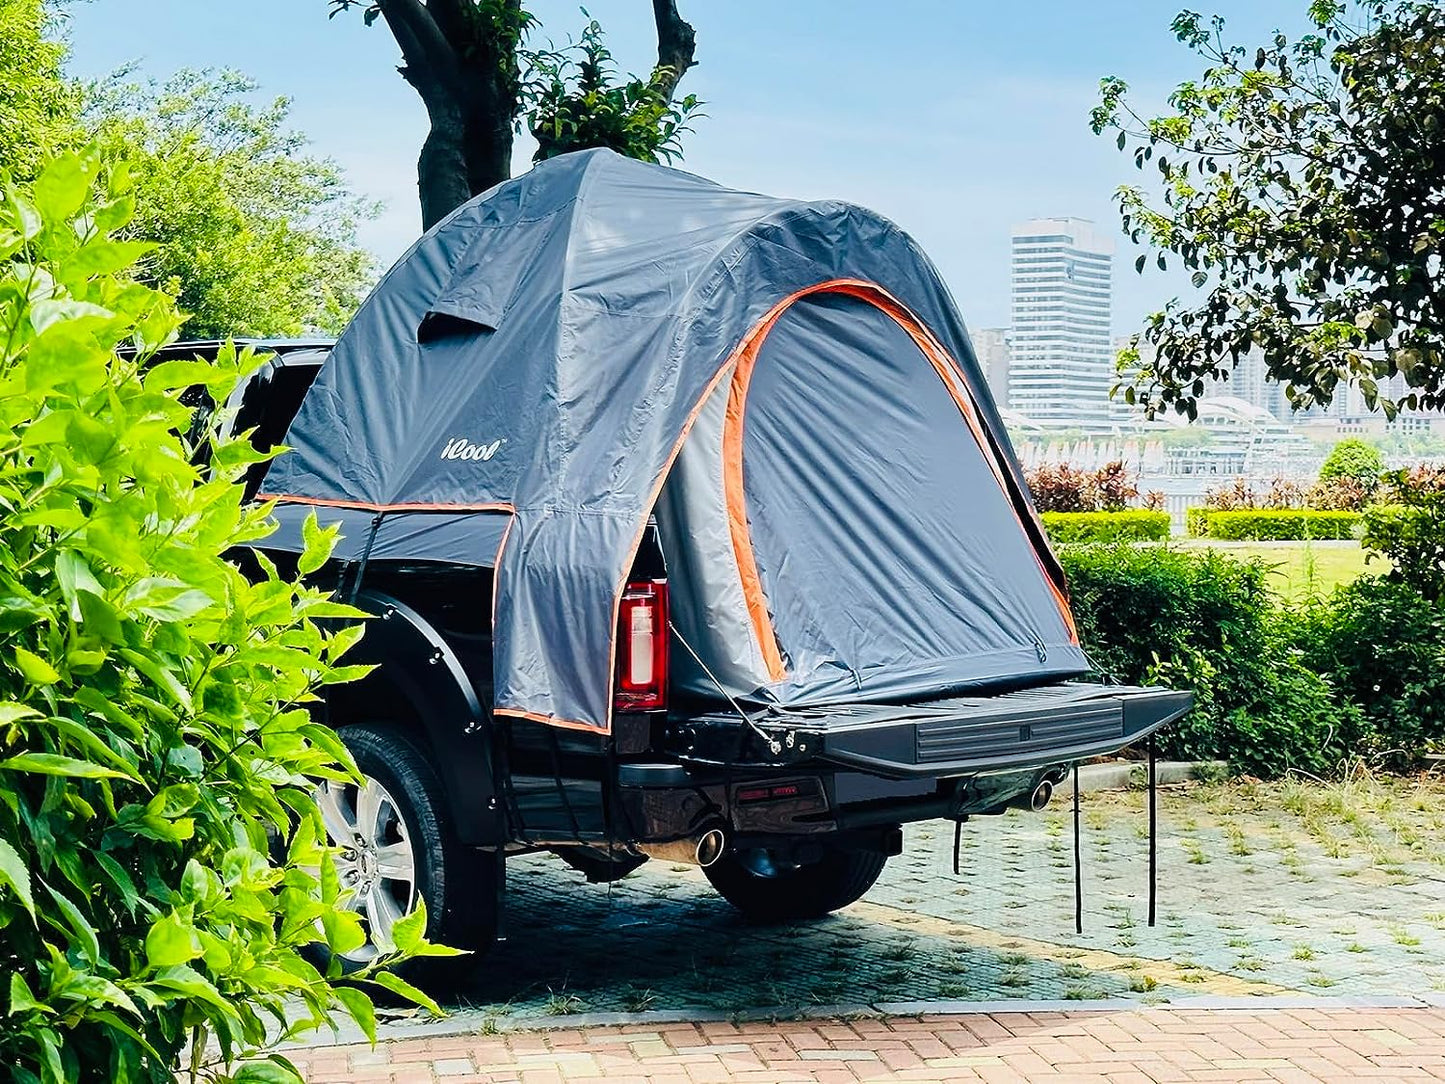  Pickup Truck Tent Cover, Waterproof PU4000mm， Three Layers of Anti-Tear Material, PU4000 Waterproof and Anti-Ultraviolet Treatment. for 5.5’ FT Pick-up Truck Tent (Pickup Tent Not Included)